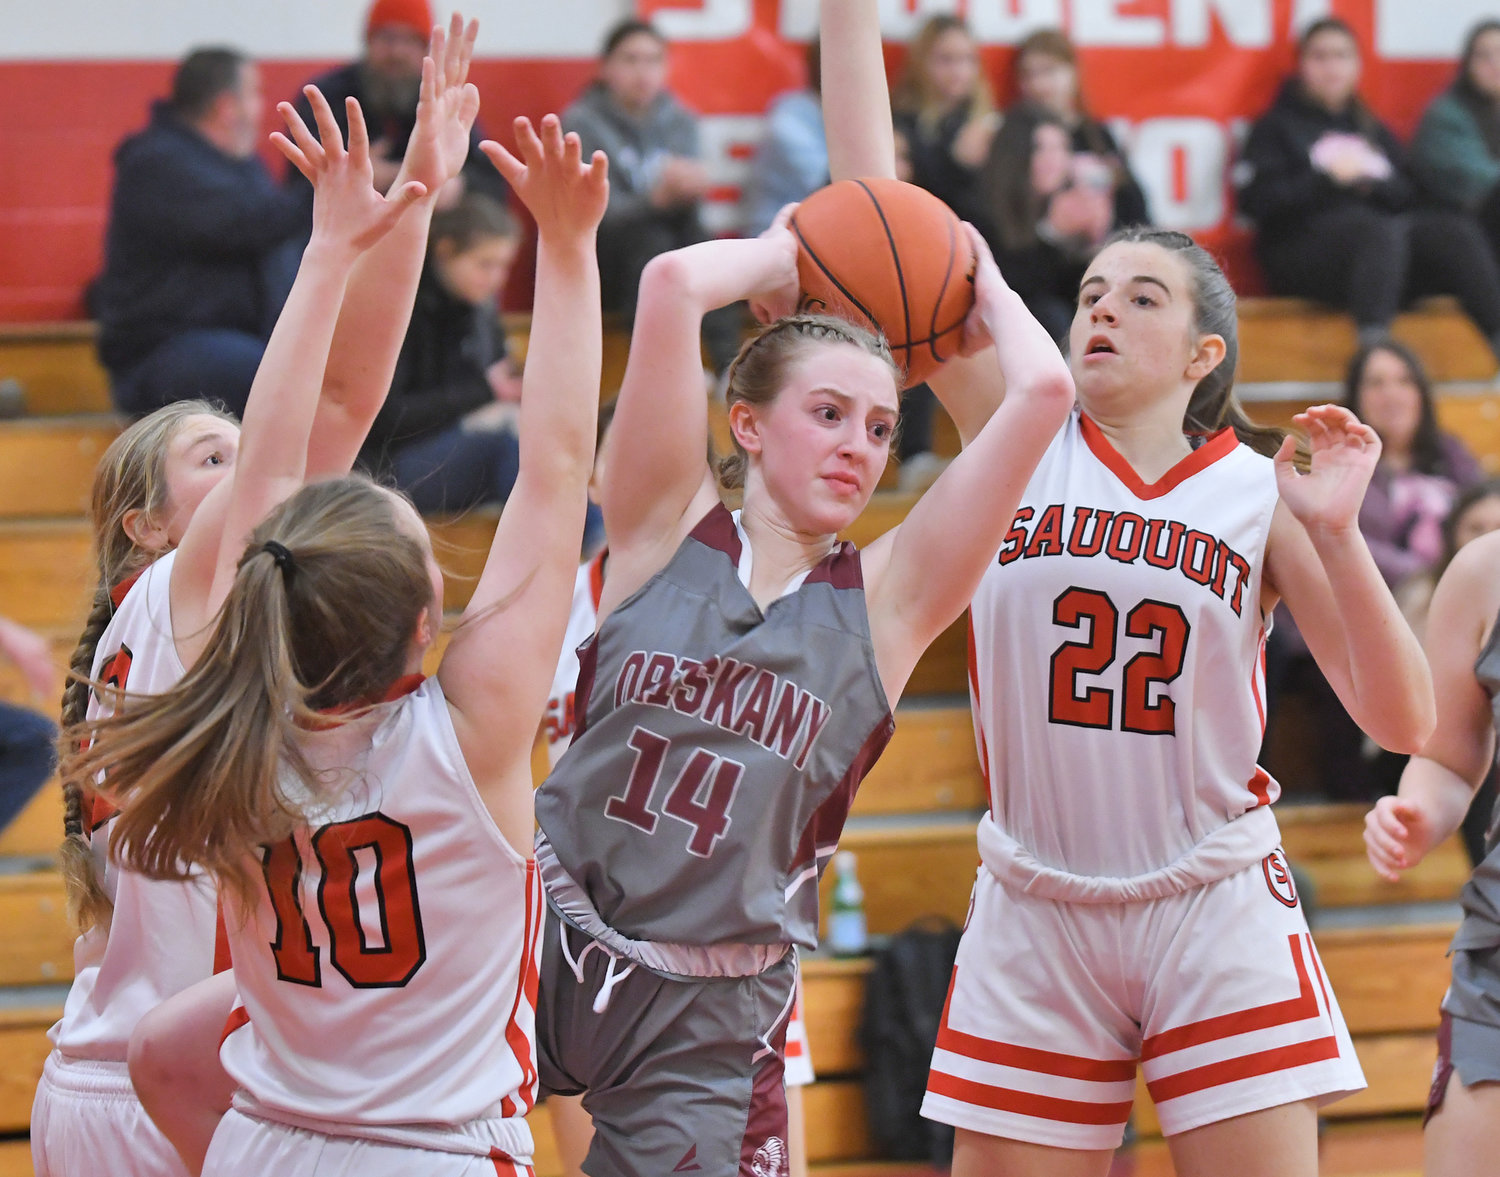 Oriskany’s Megan Wright looks to pass while surrounded by Sauquoit Valley players Jadyn Land (42), Allison Crandall (10) and Makayla Land (22) in the first quarter Wednesday night at Sauquoit. Wright scored 12 points and Oriskany won 44-30.